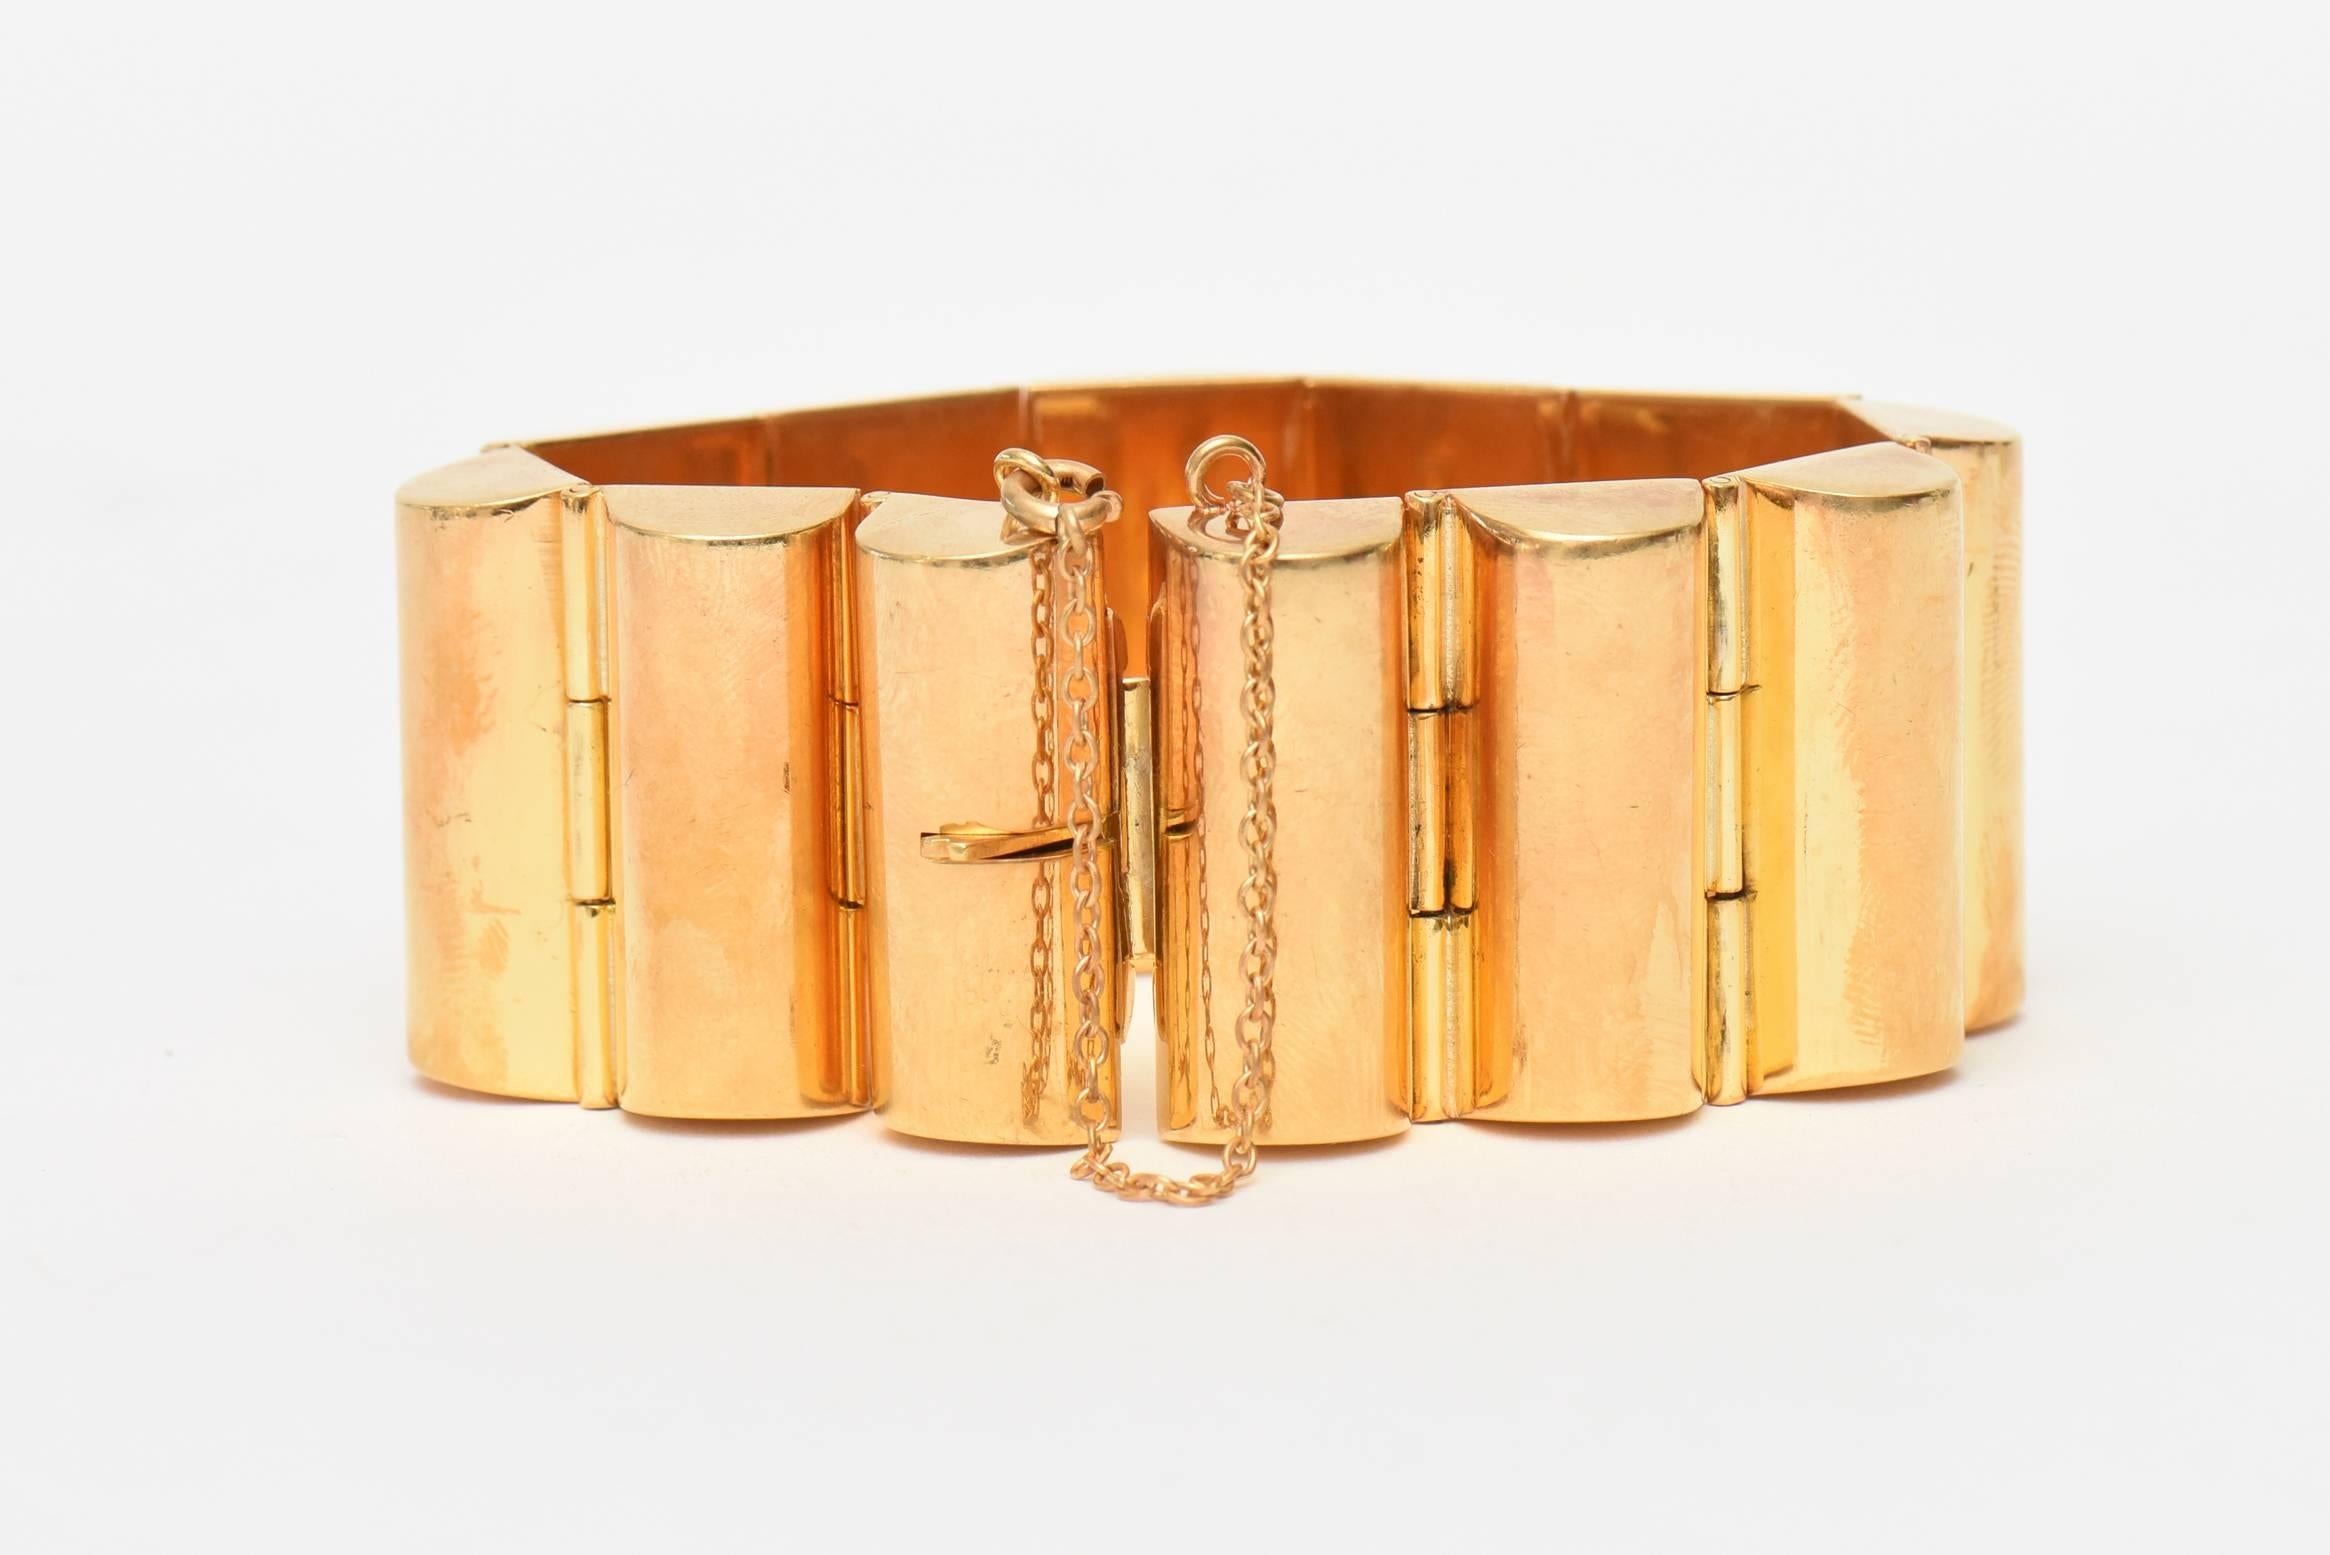 This classic and timeless chic real gold plated Art Deco channeled cuff bracelet is for day or evening. It was made to look real. It is from the 30's. It has a safety catch chain and is most likely from the art deco era but retains a modern edge and